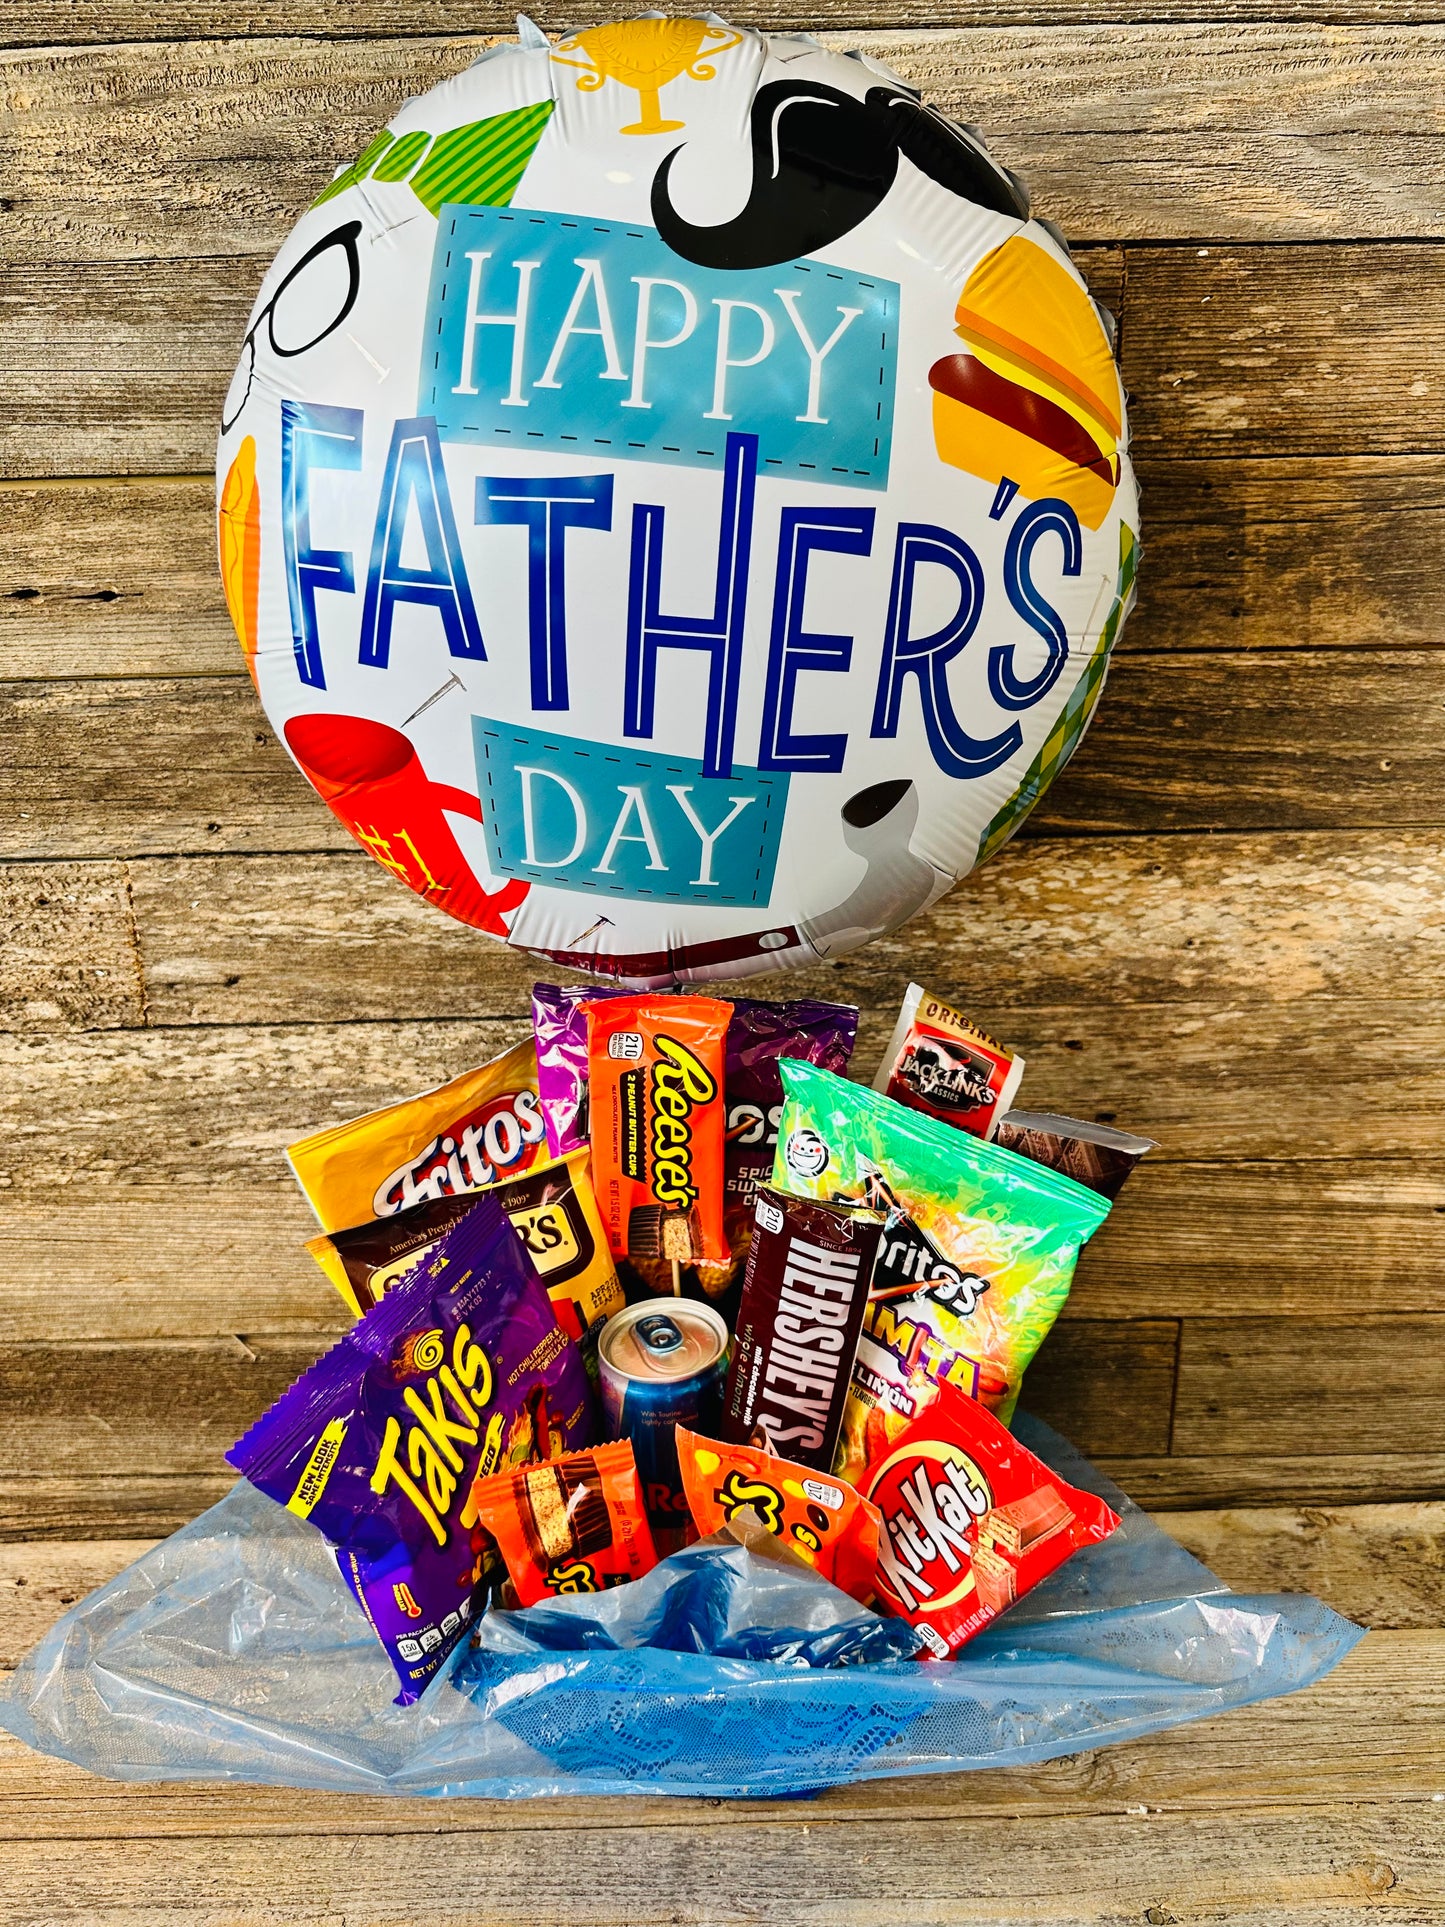 Fathers Day Snack/ Candy gifts